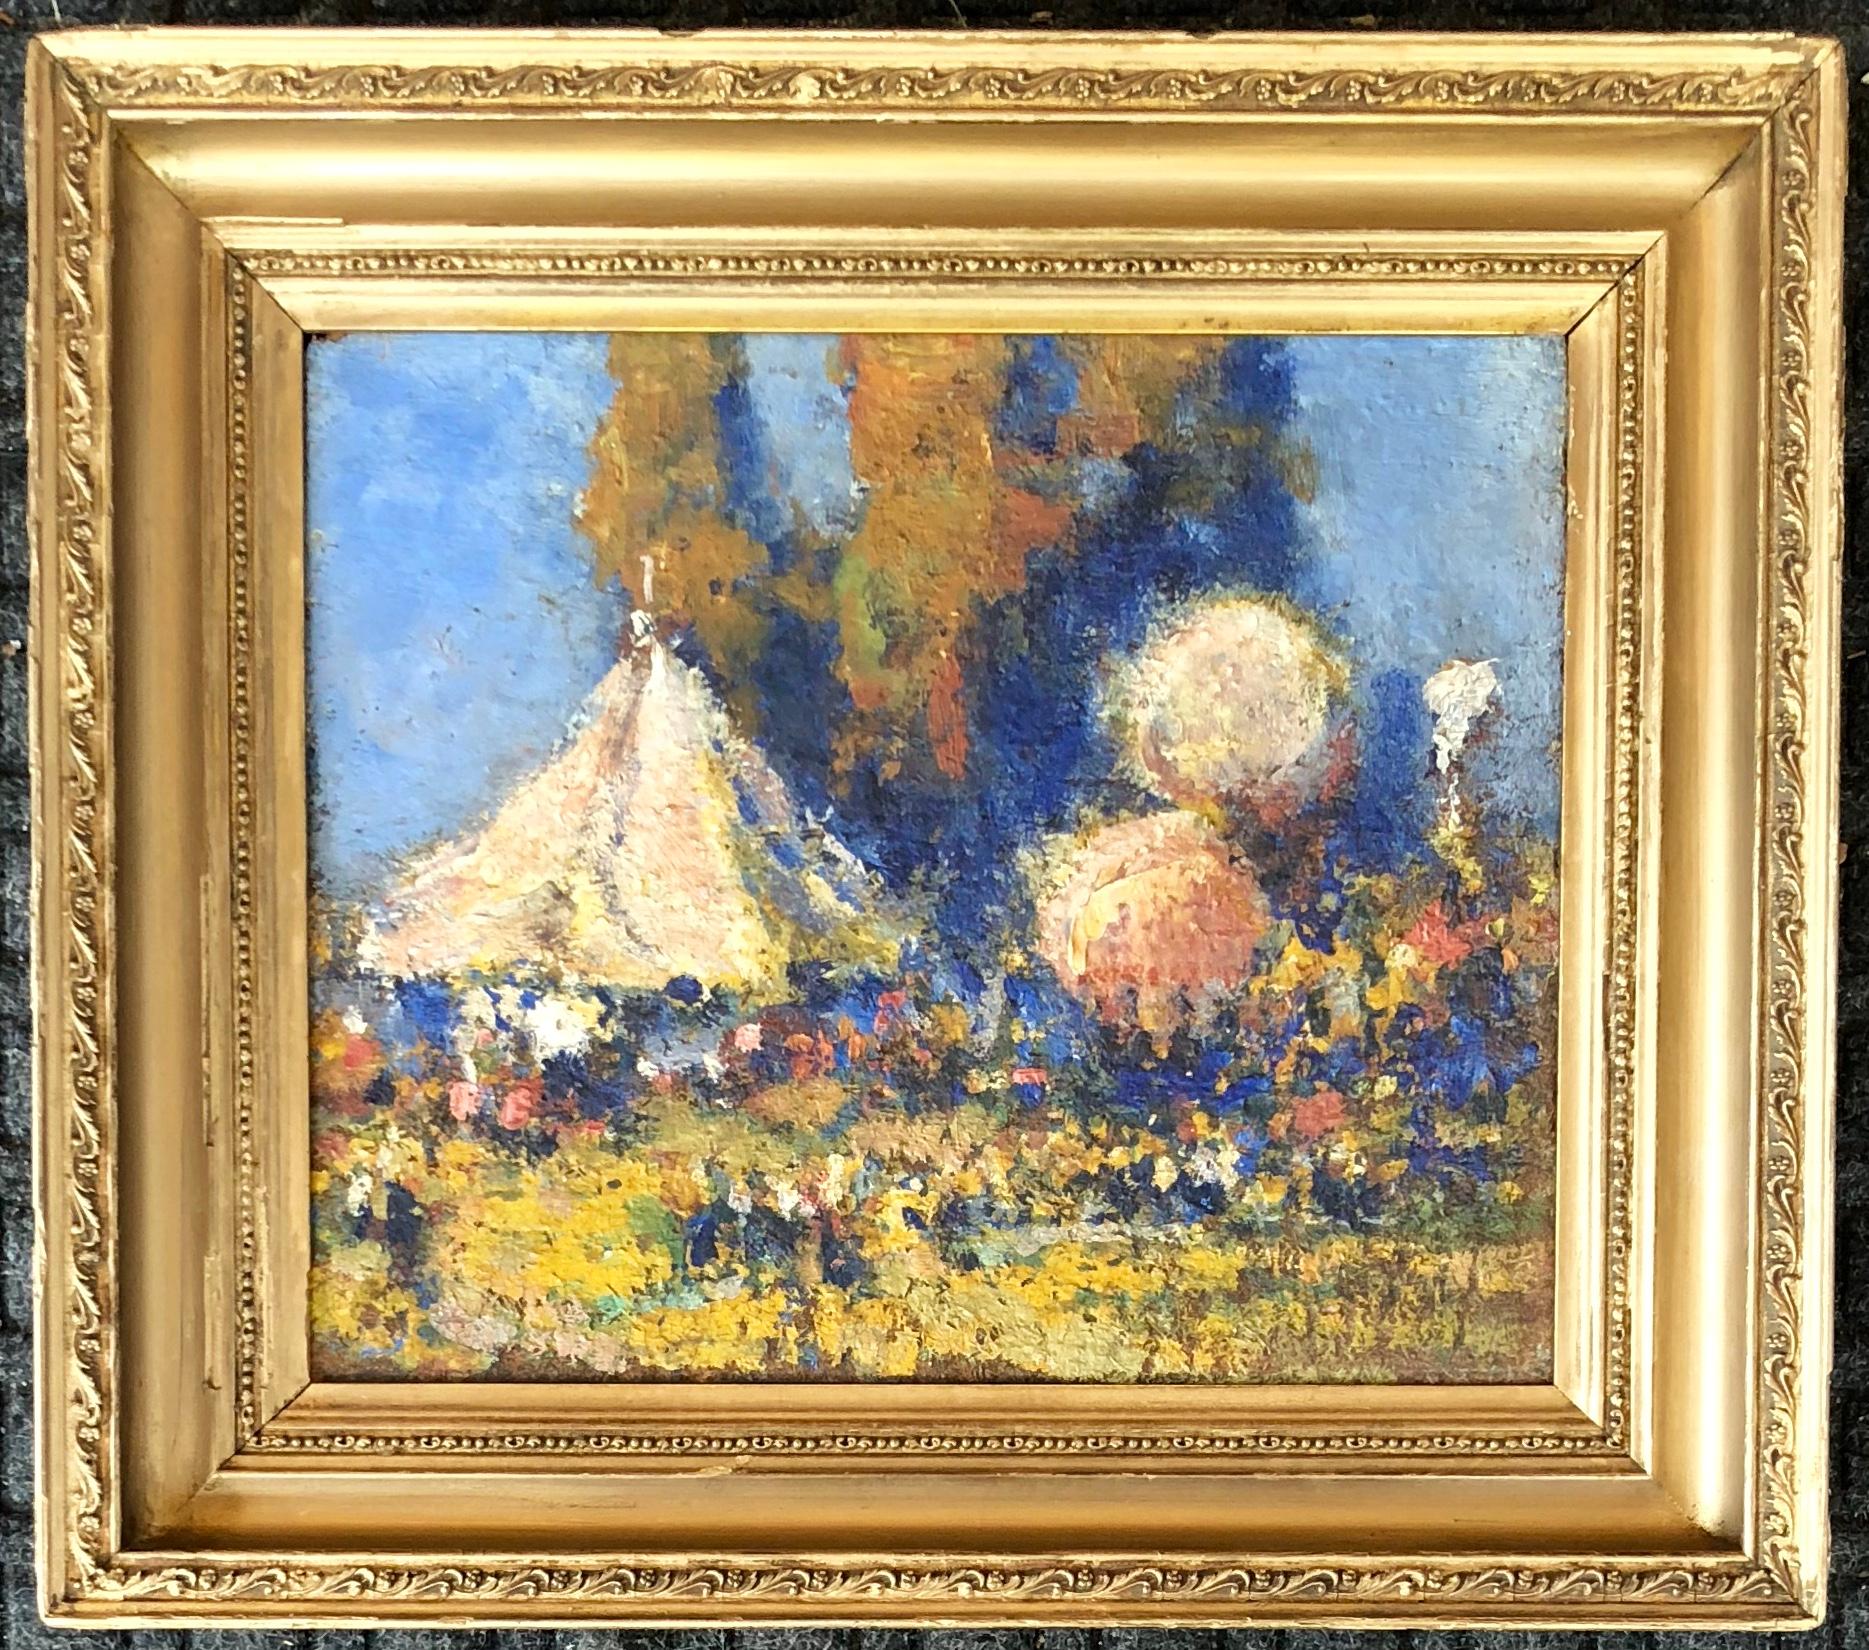 Oil on board in early frame. Signed on back of panel.
1864-1929
John C. Huffington was a self-taught artist who painted scenes he encountered in his travels along the northeastern coast of the United States. Born in Brooklyn in 1864, he learned